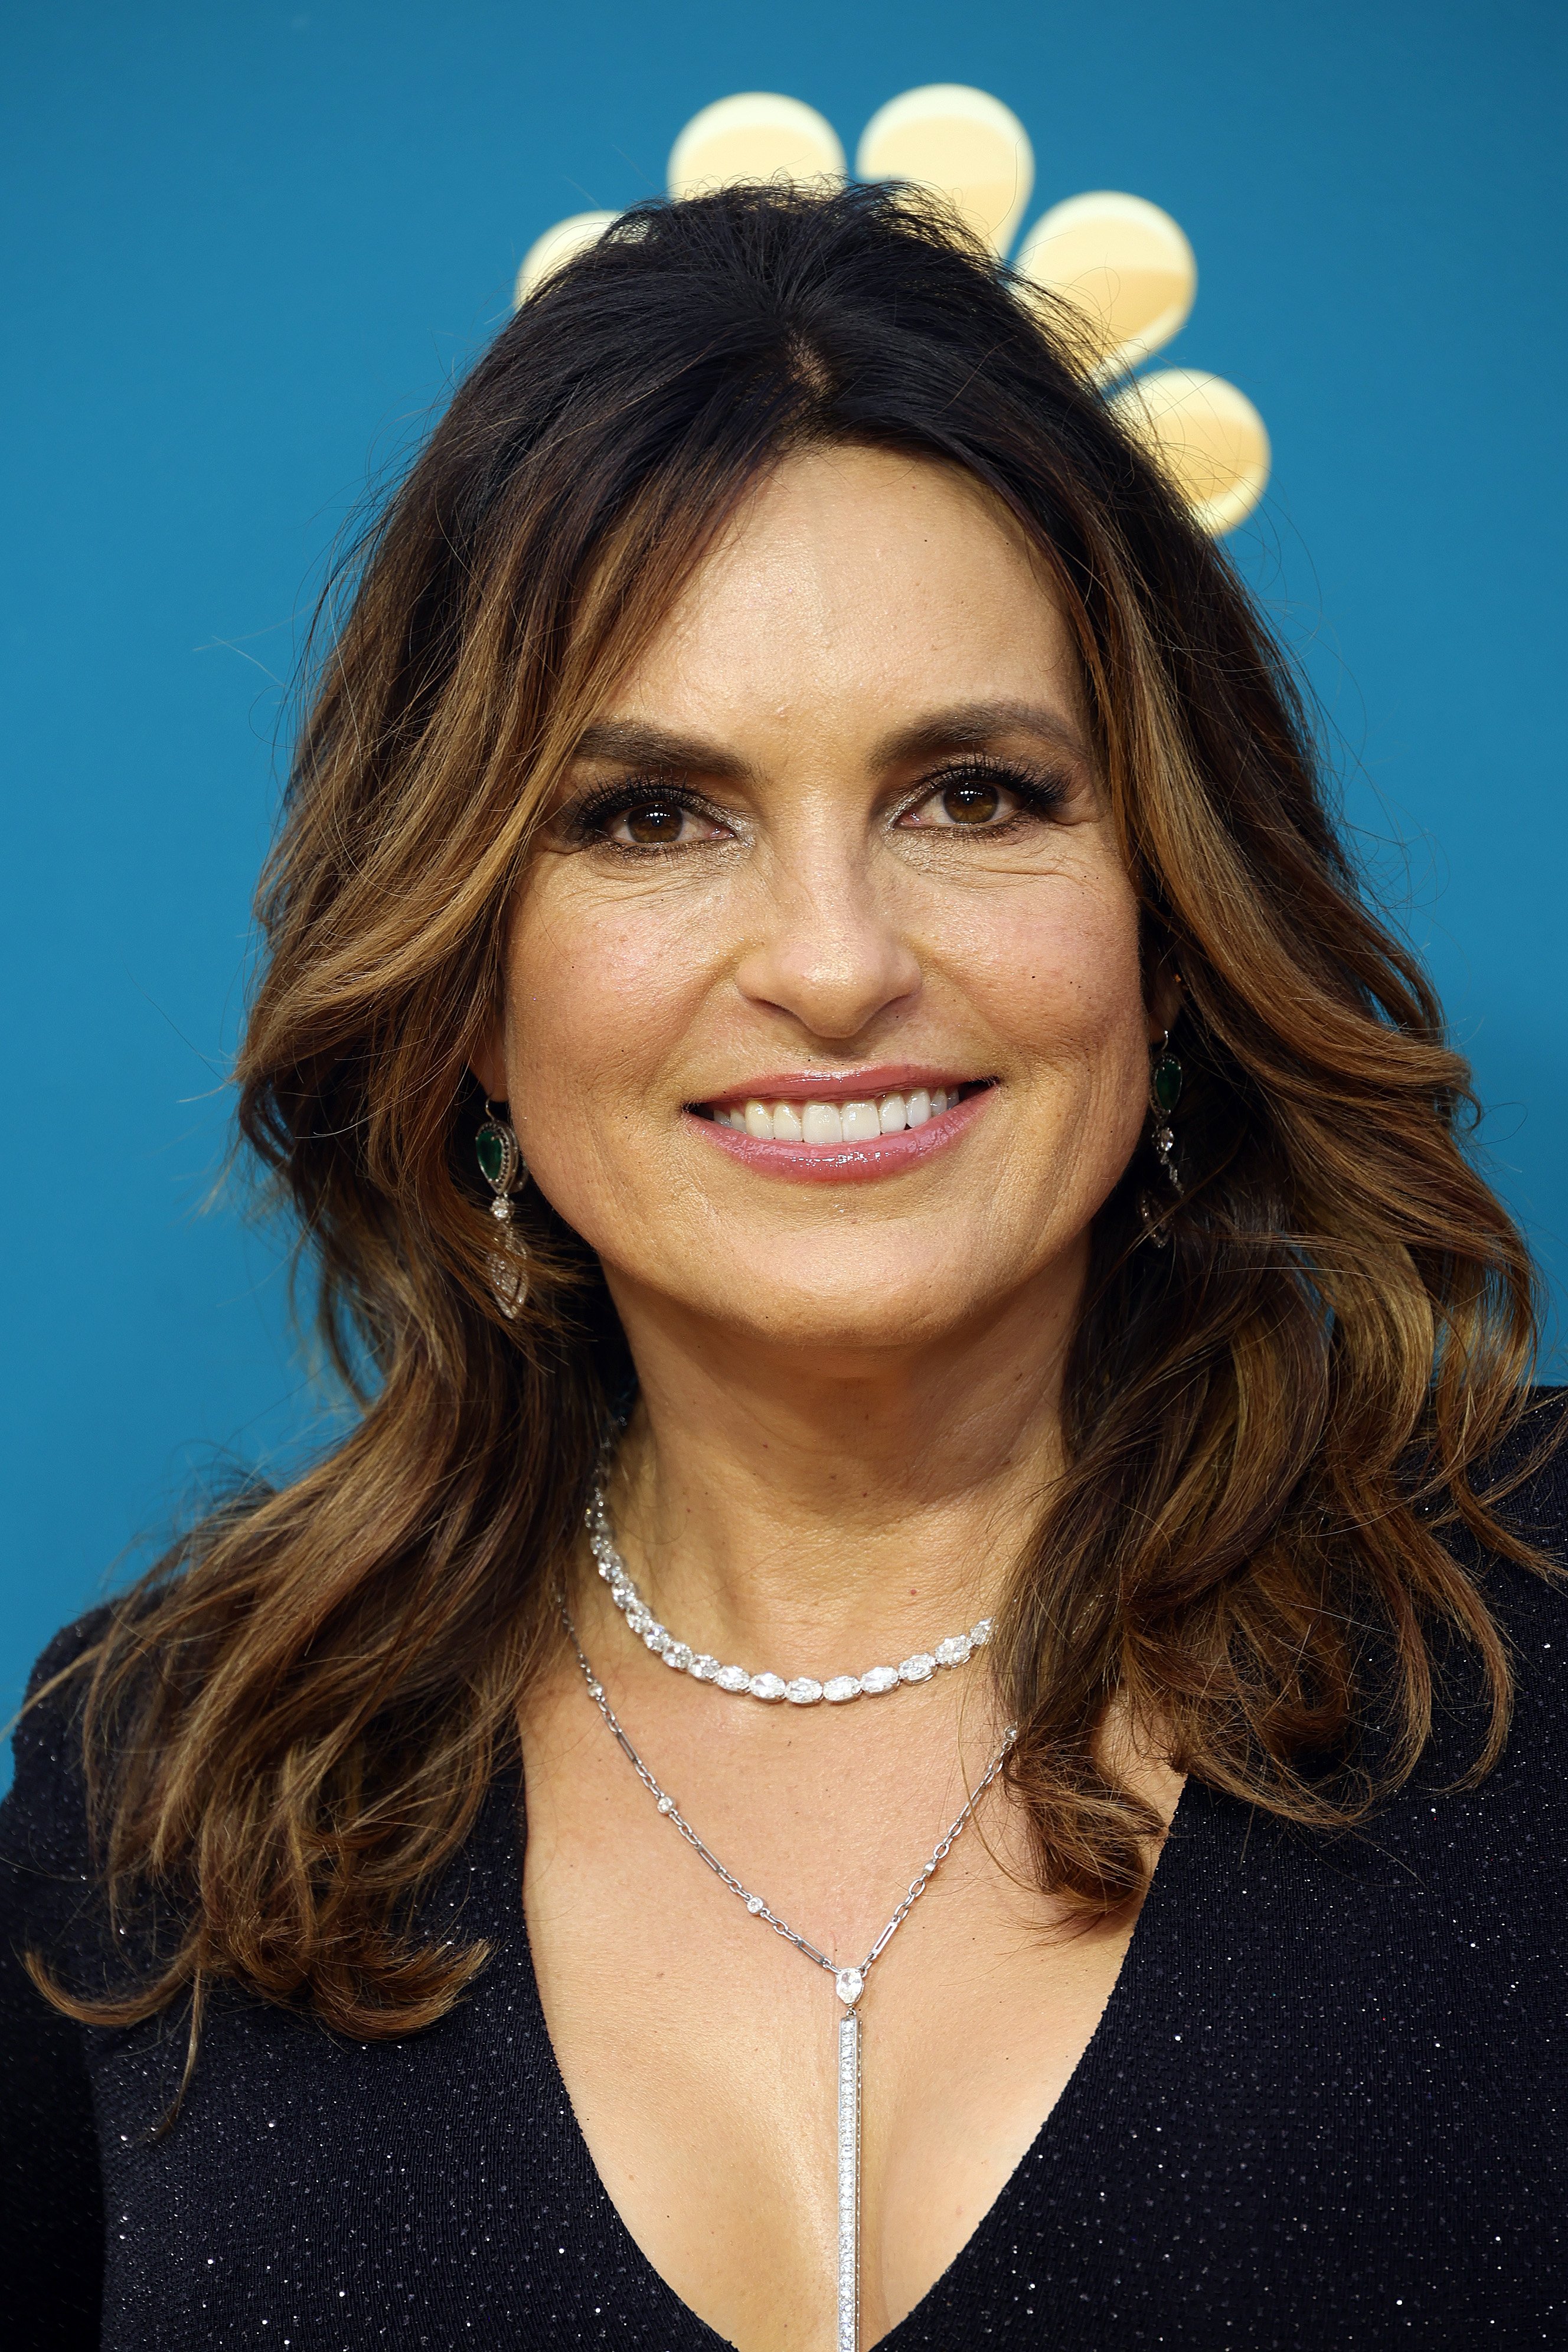 Mariska Hargitay attends the 74th Primetime Emmys at Microsoft Theater on September 12, 2022, in Los Angeles, California. | Source: Getty Images